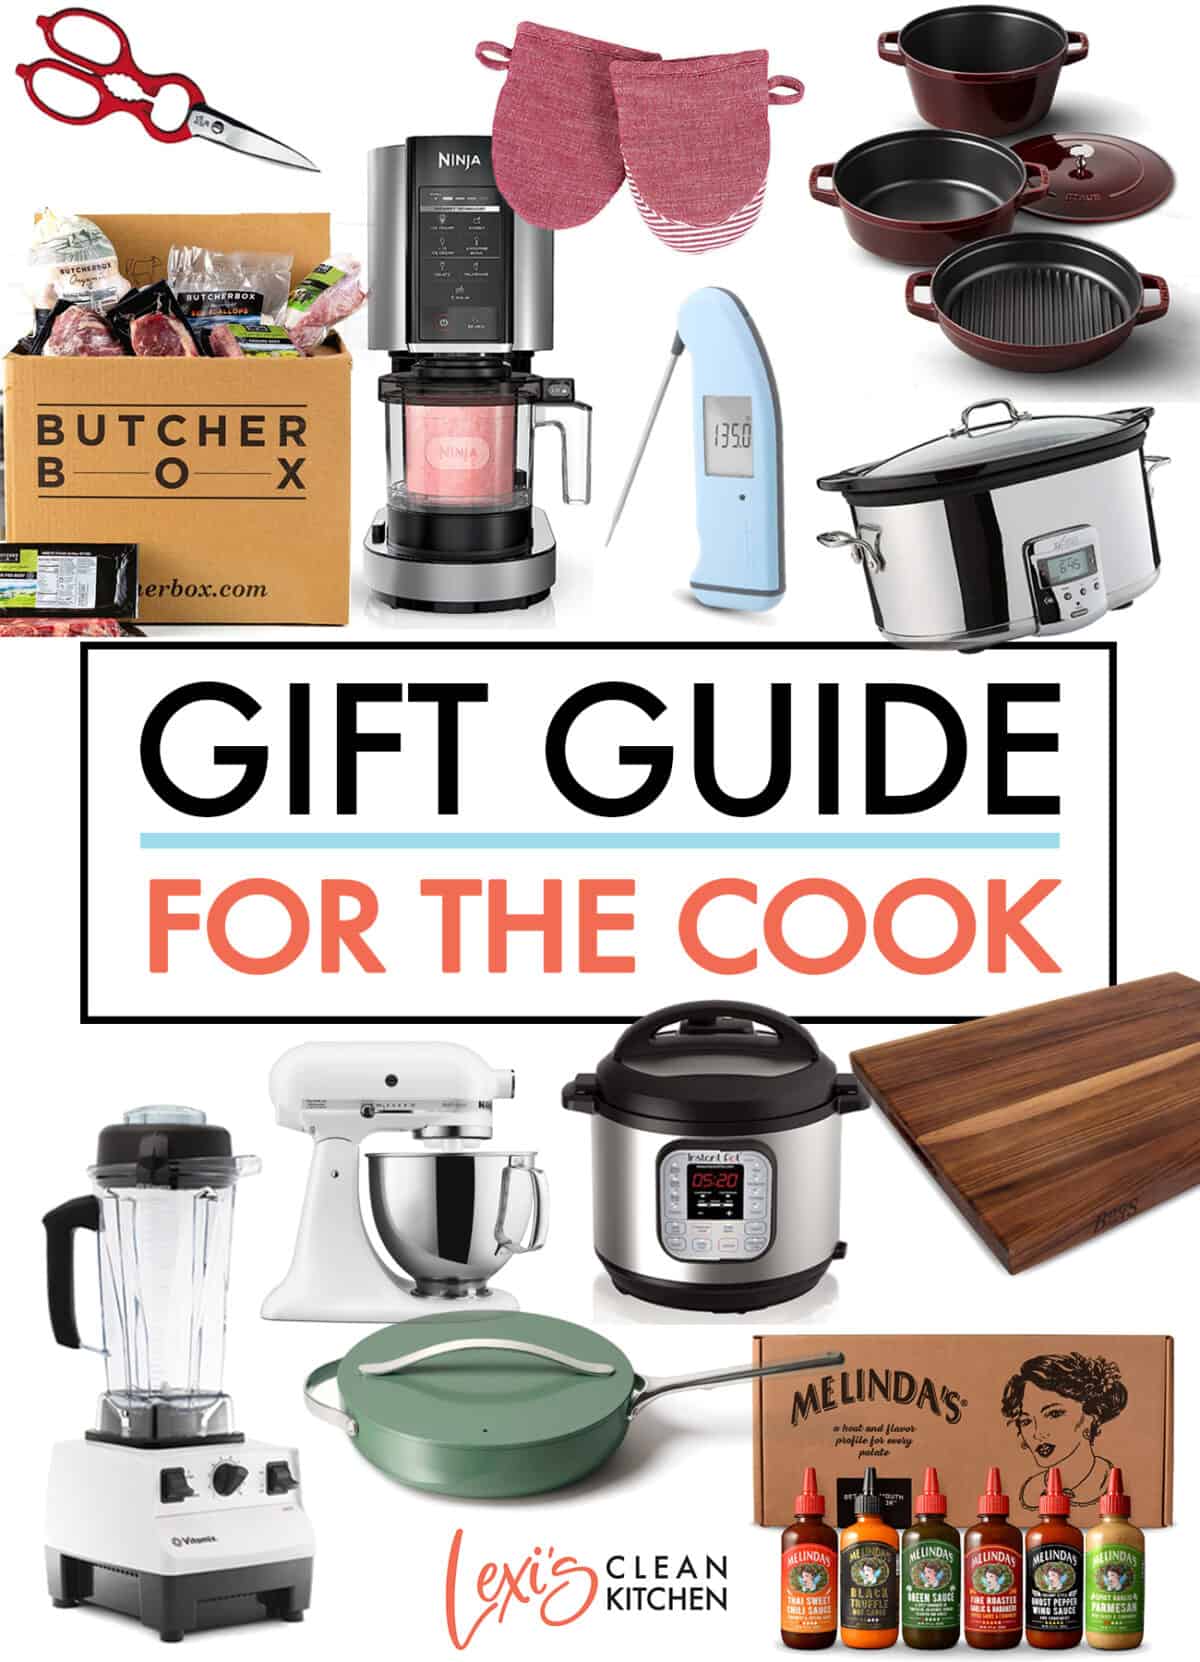 2021 KITCHEN GIFT GUIDE: 17 OF MY FAVORITE KITCHEN GIFTS